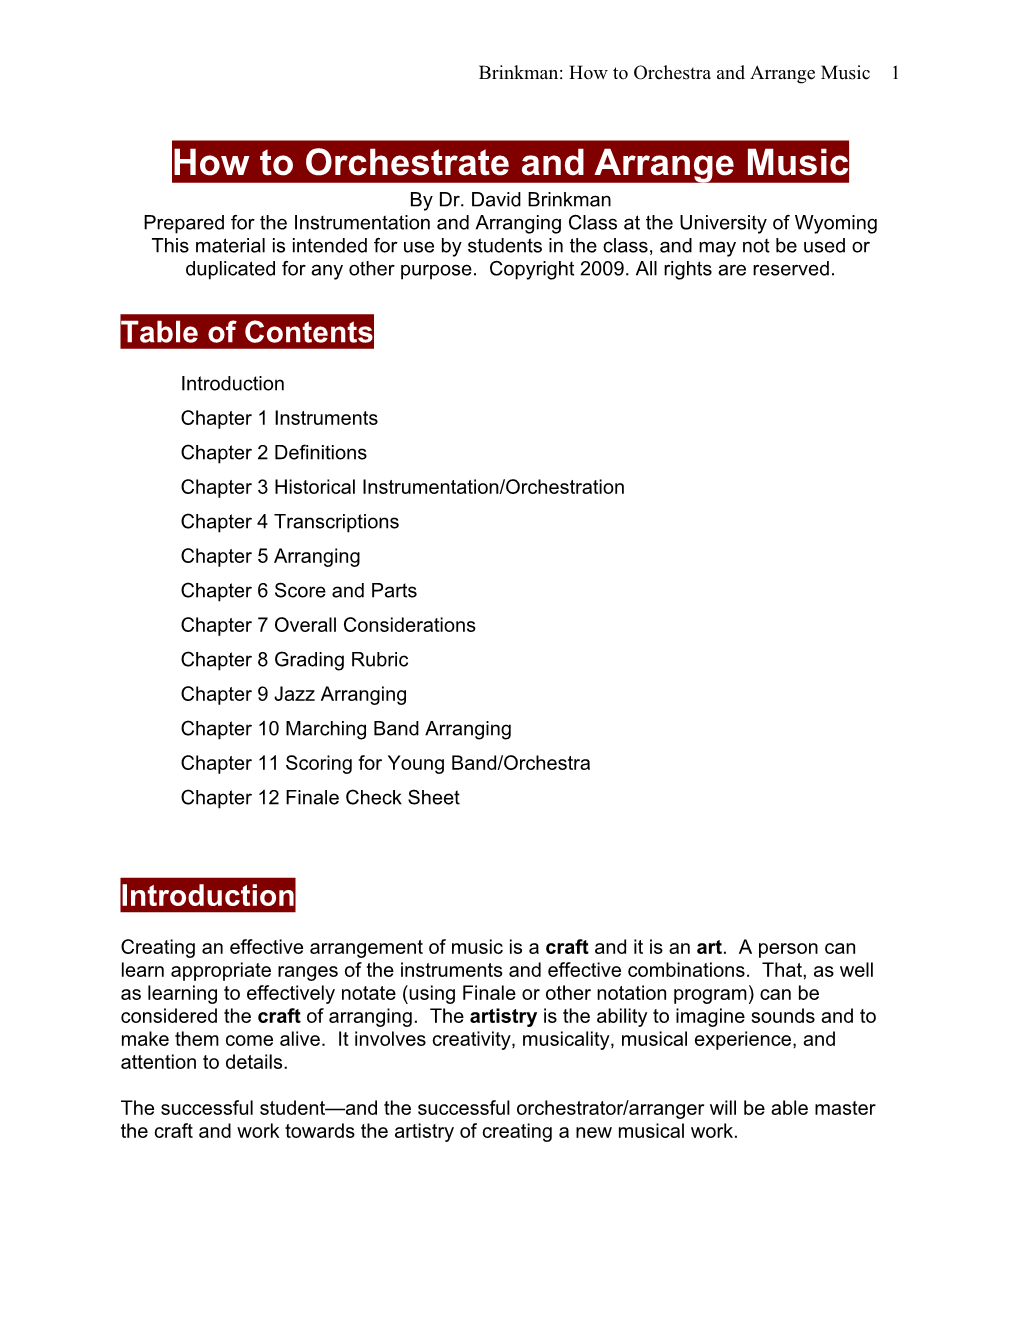 How to Orchestrate and Arrange Music by Dr